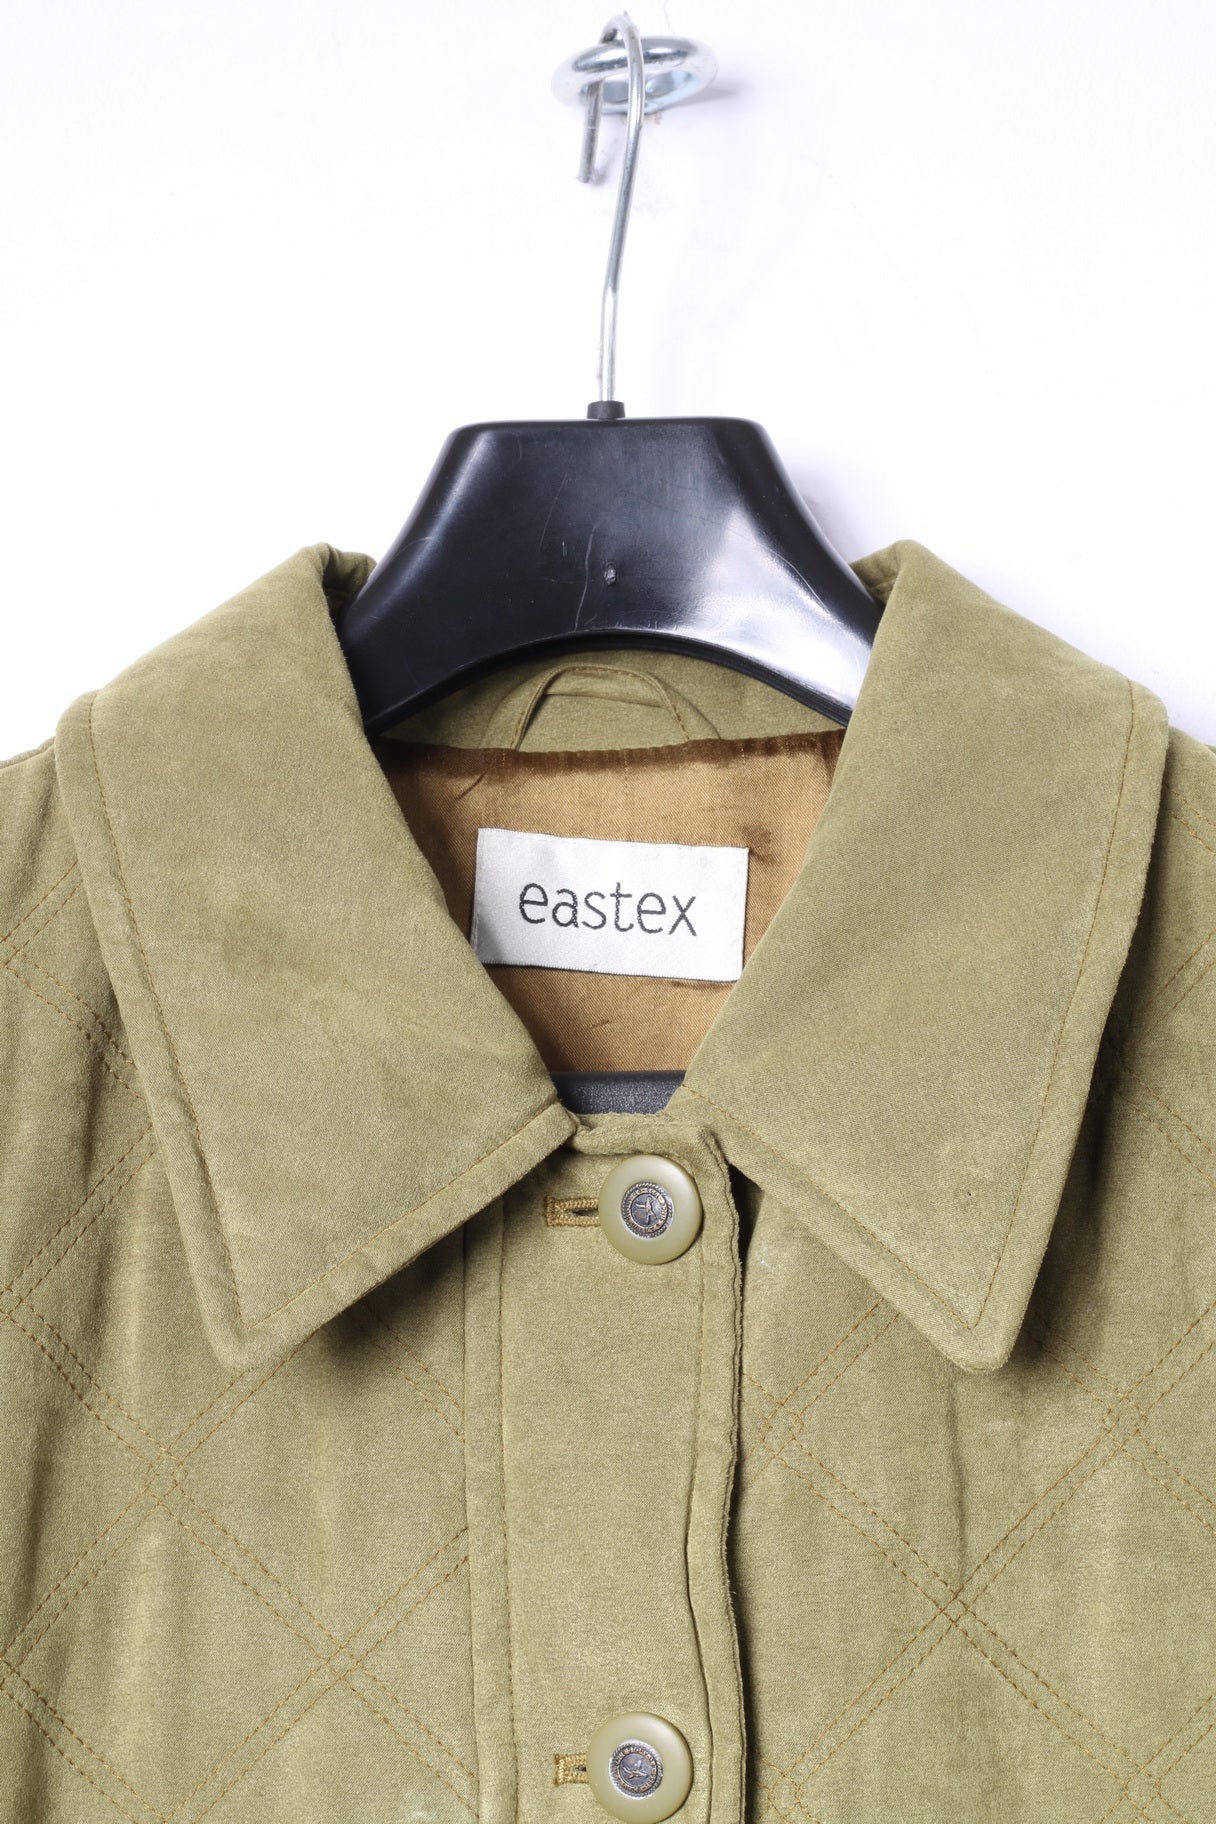 Eastex Womens 14 40 Jacket Quilted Green Buttoned Retro Coat Top